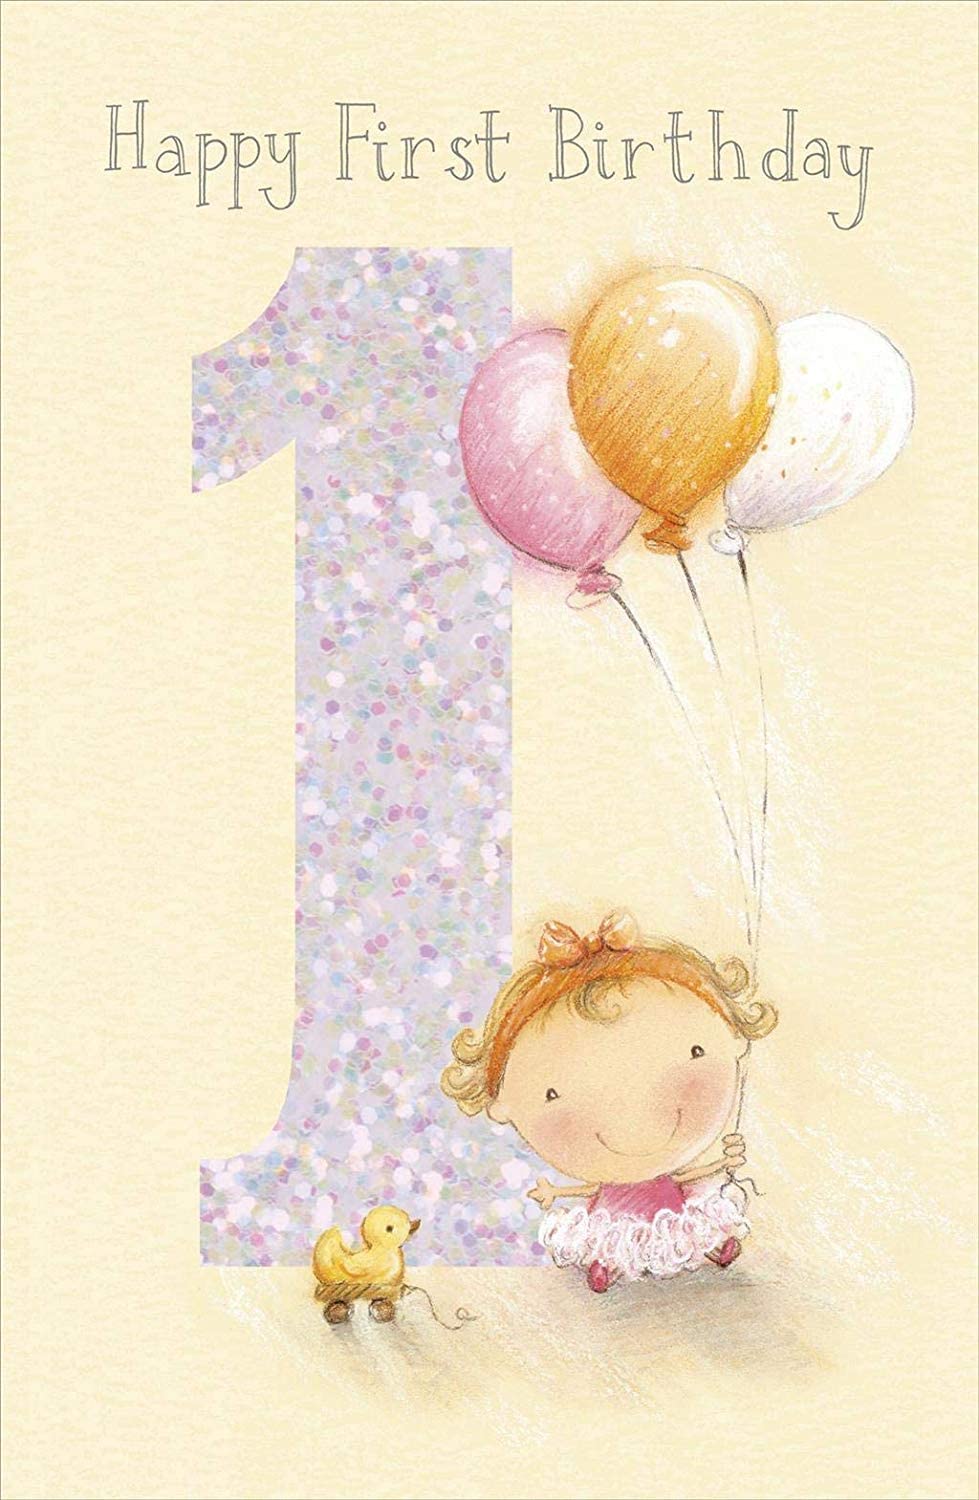 1st Birthday Card - Baby Girl With Balloons